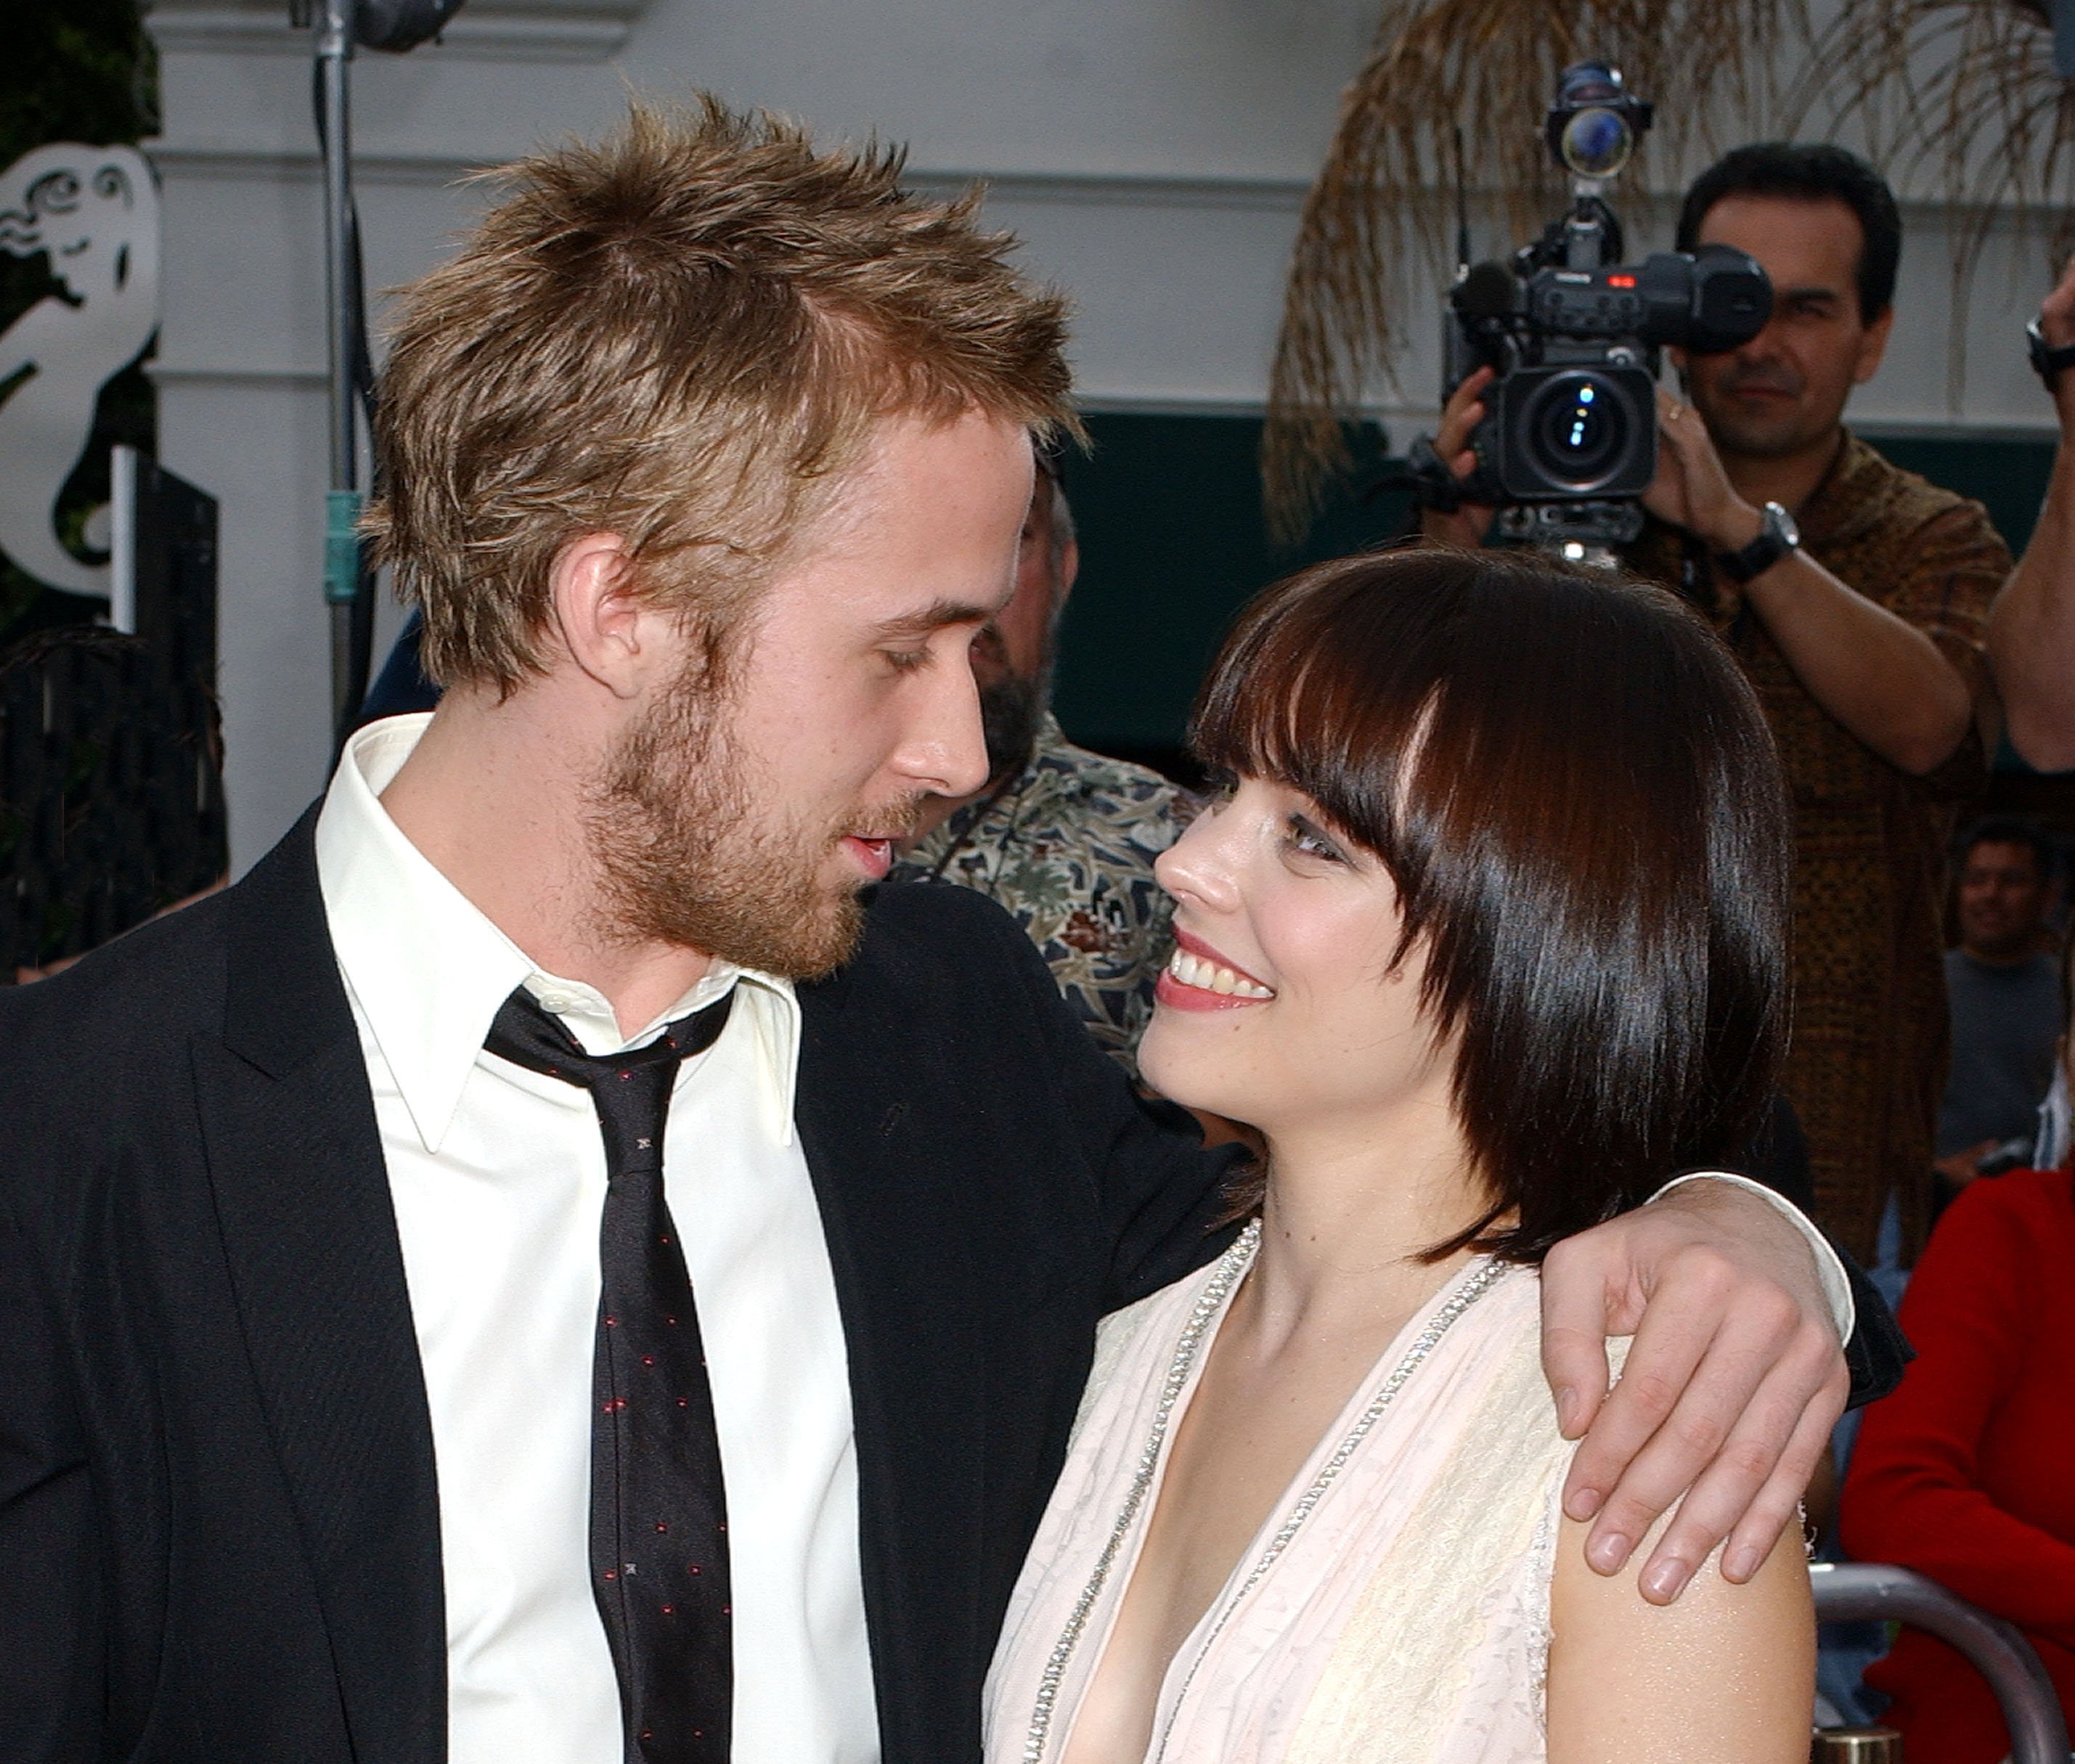 Ryan Gosling and Rachel McAdams at The Notebook premiere